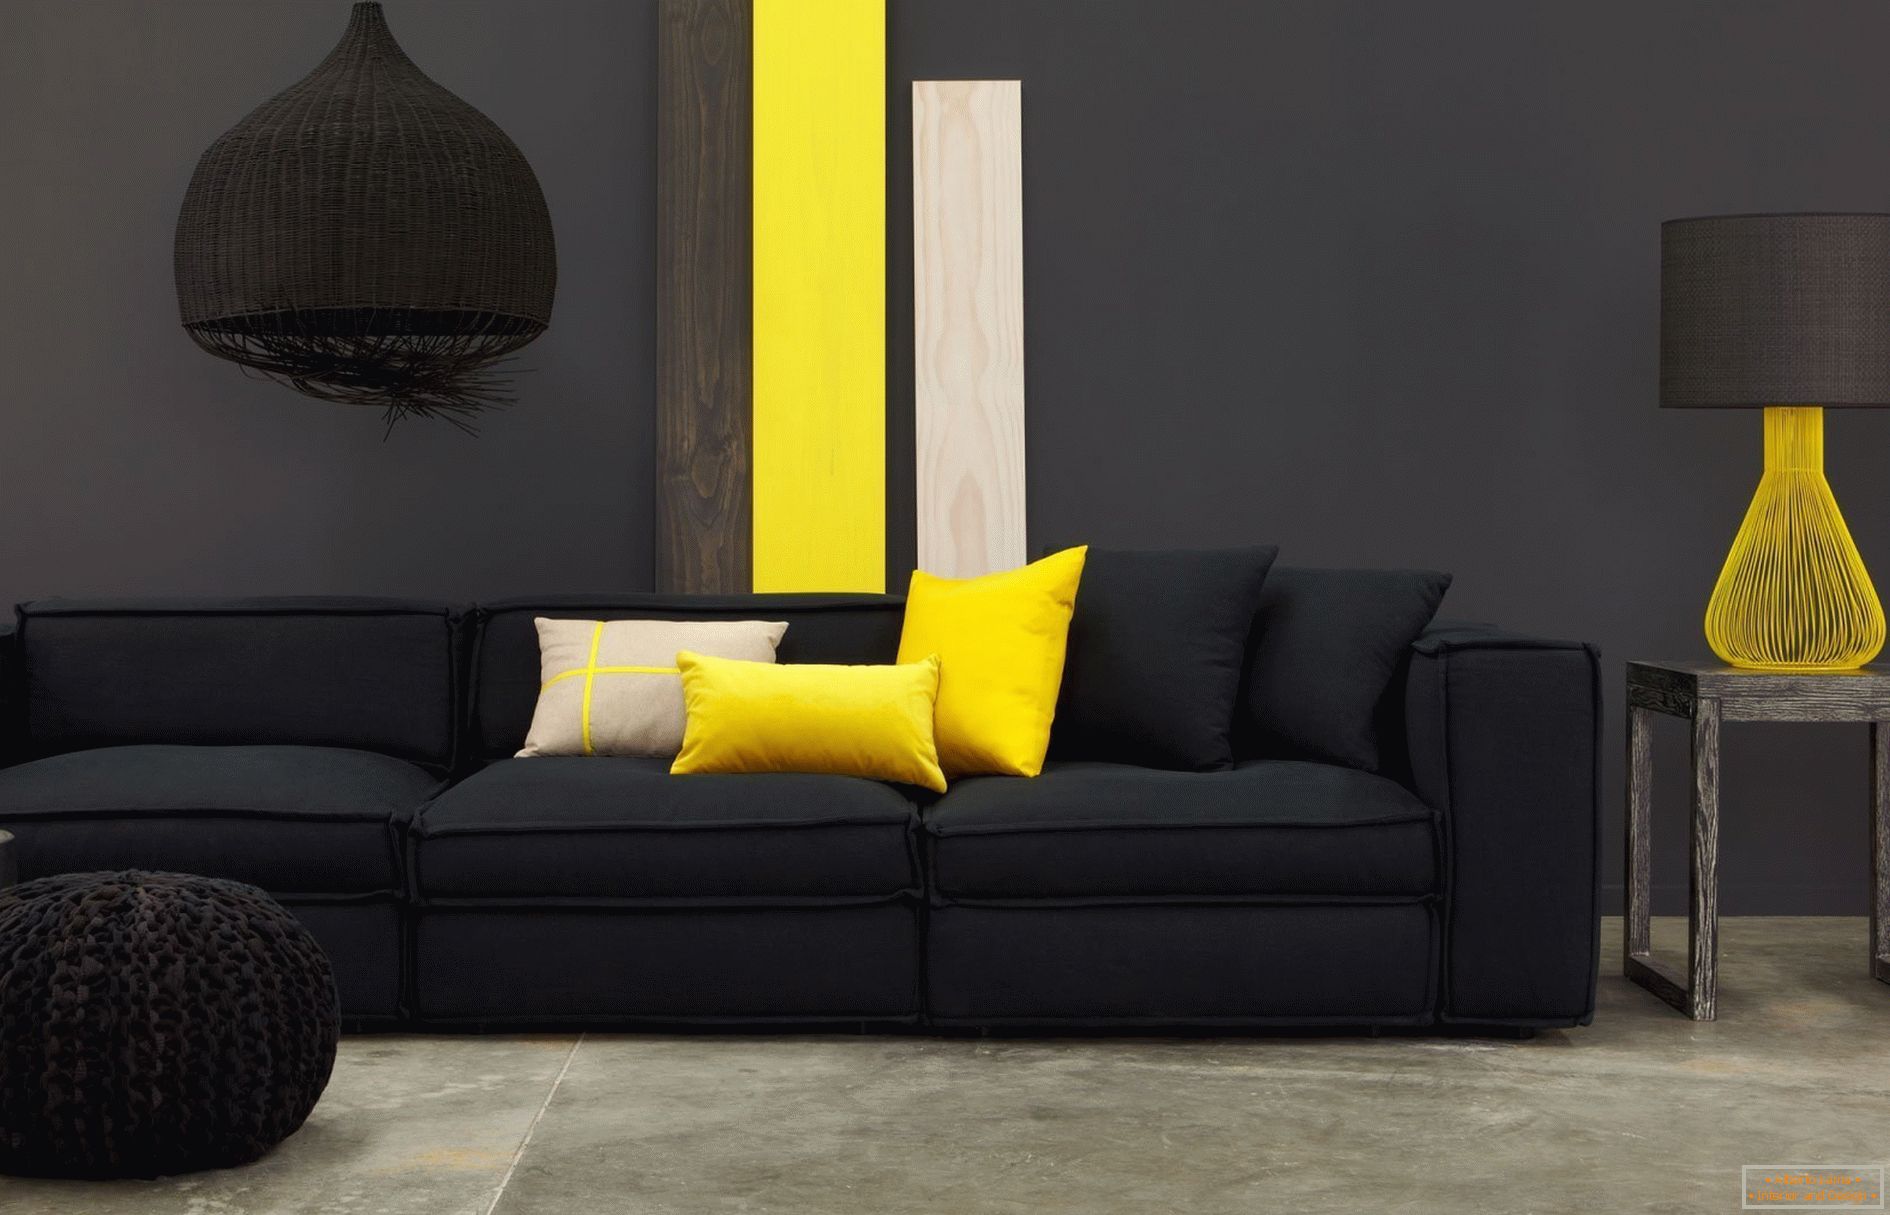 Yellow with black in the interior